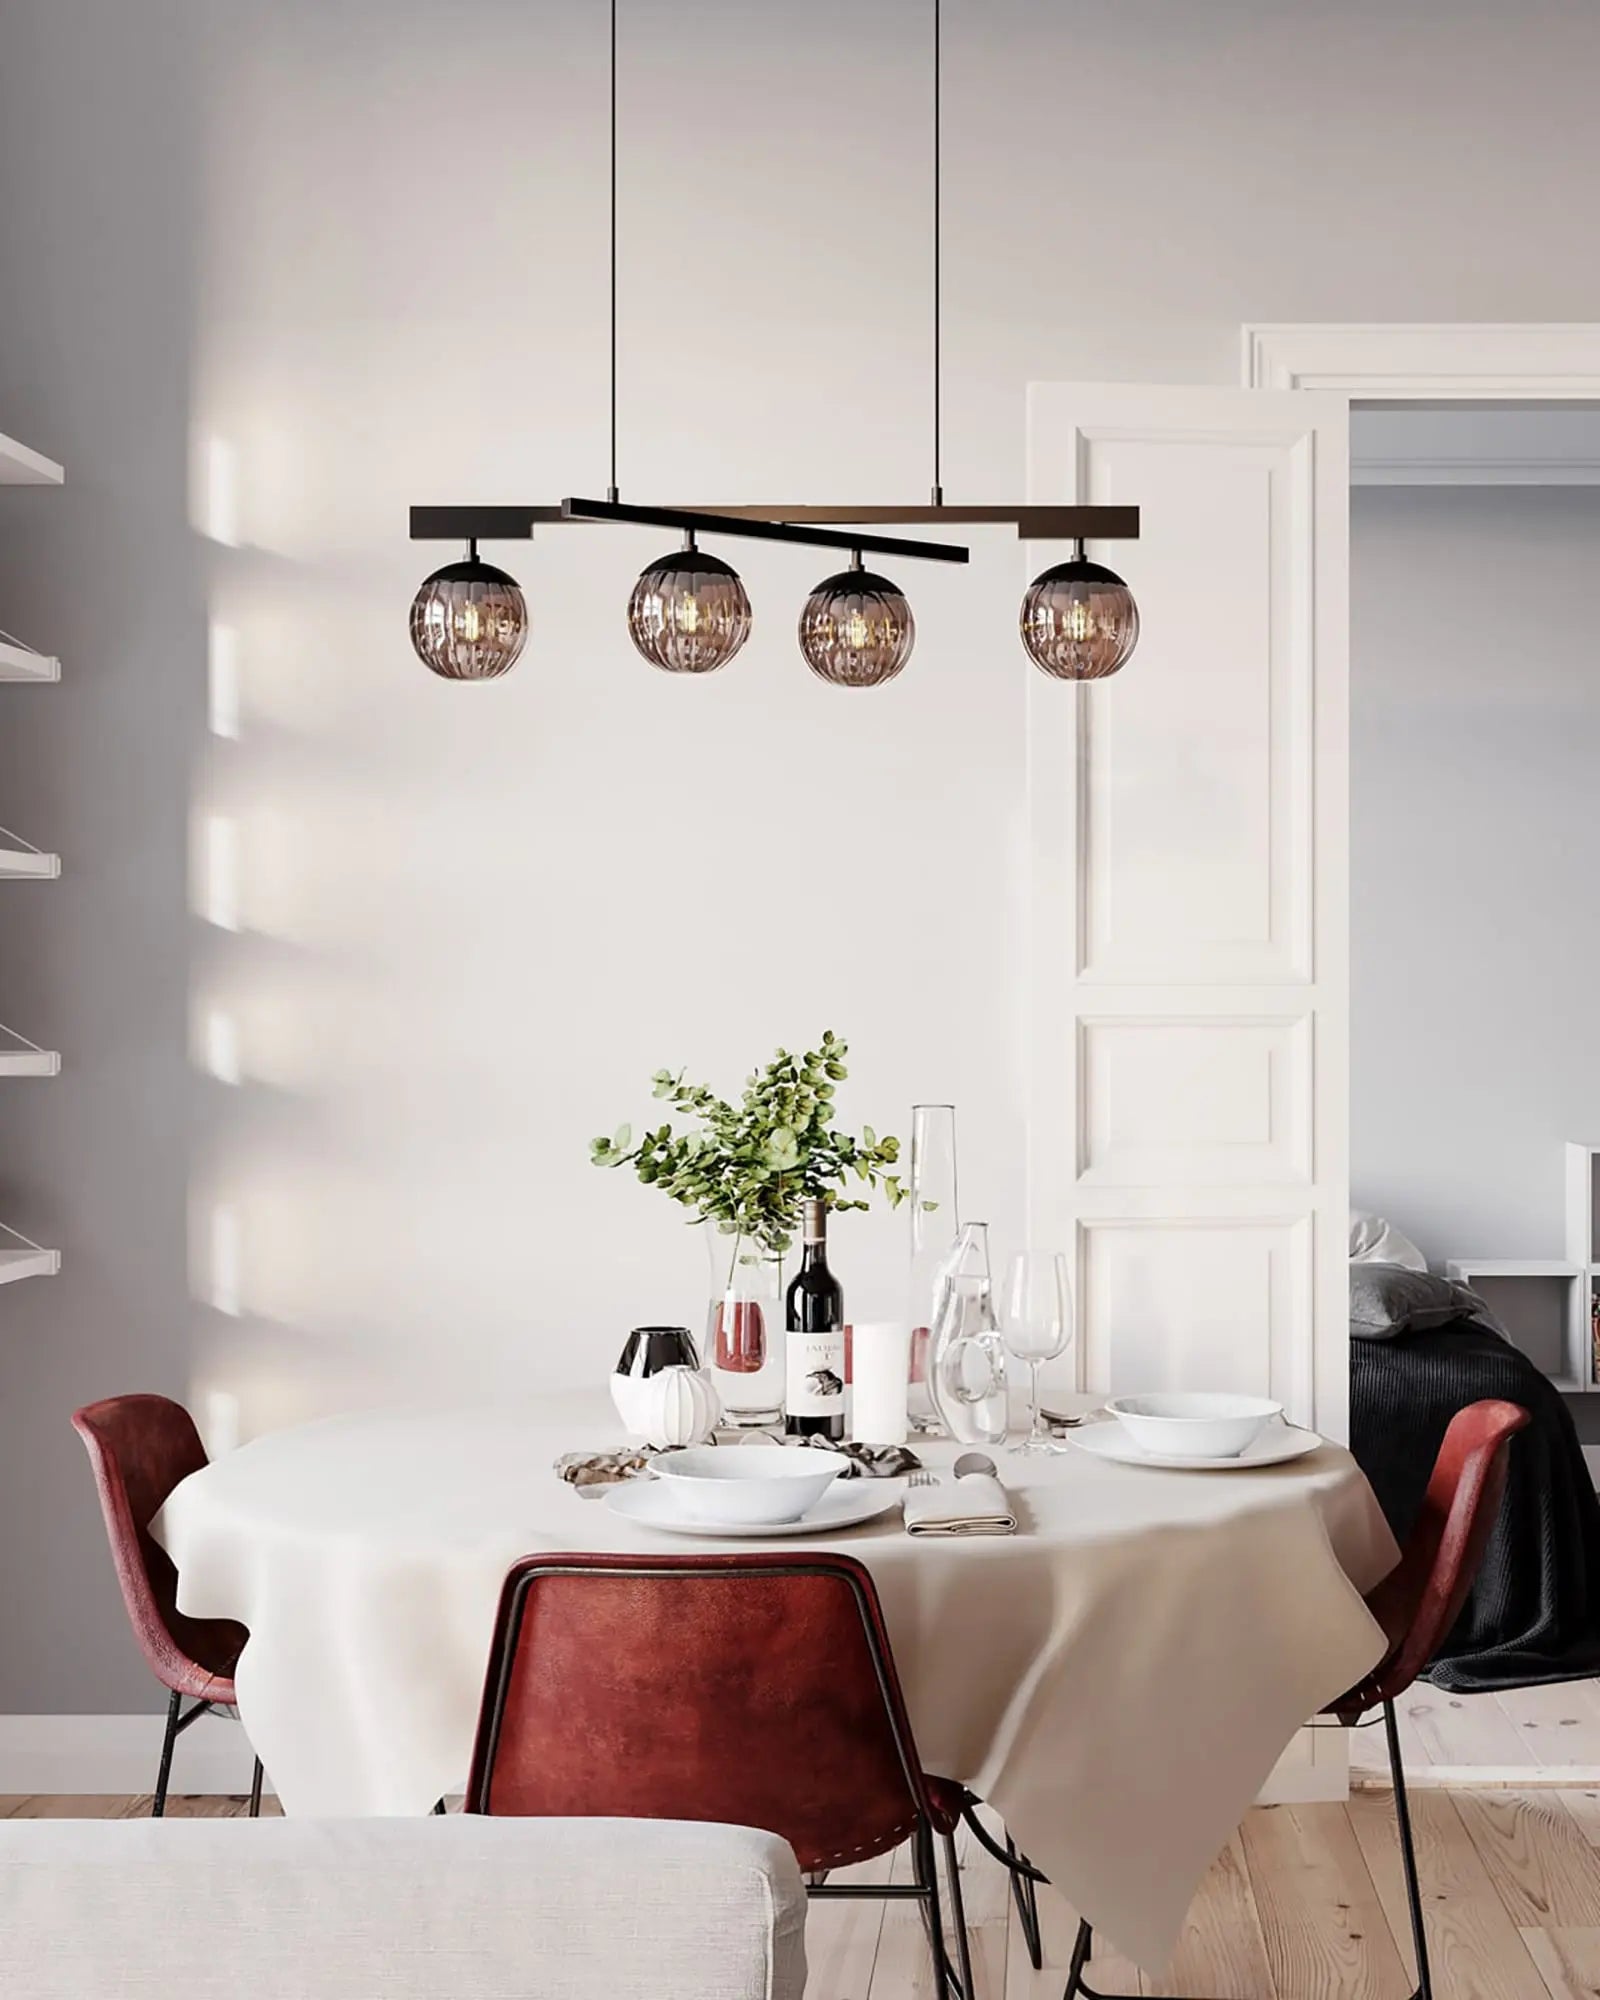 Labelle modern pendant light above a dining table